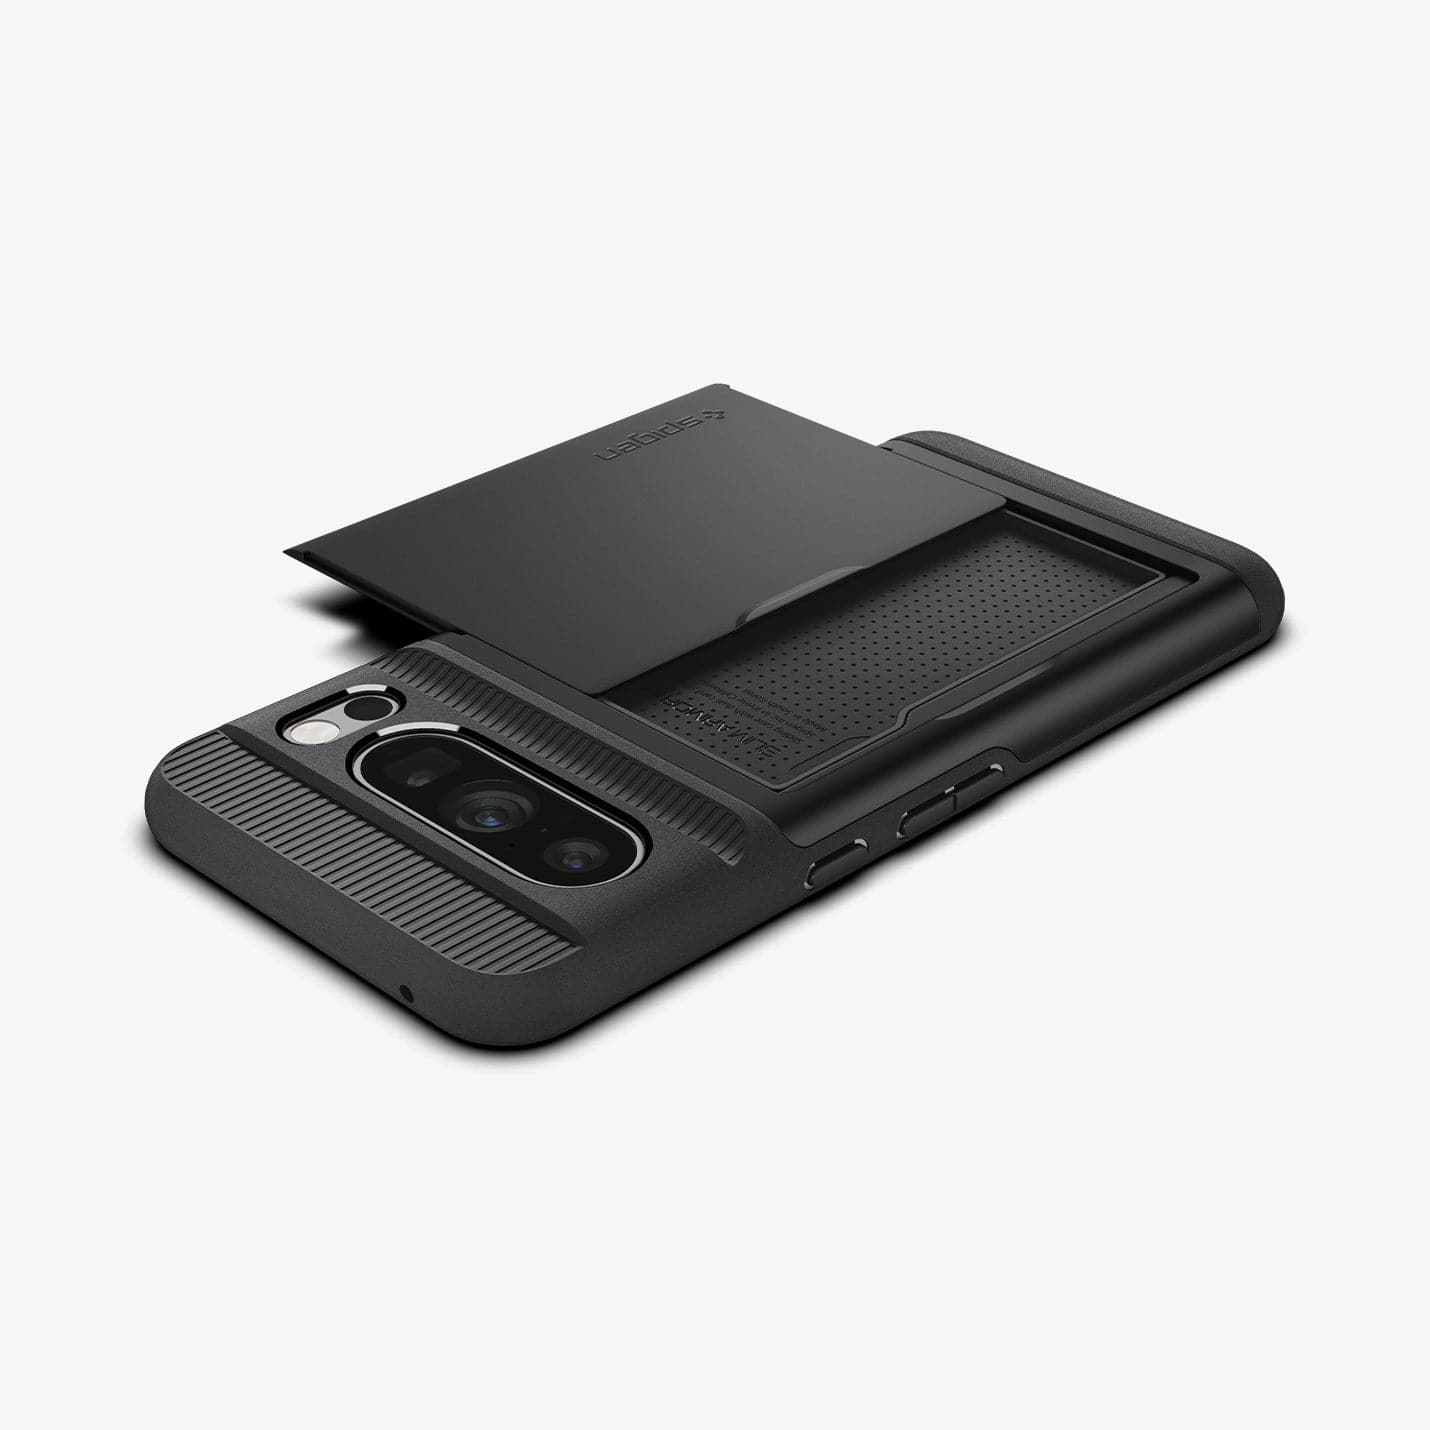 ACS06323 - Pixel 8 Pro Case Slim Armor CS in black showing the back, side and top with card slot open